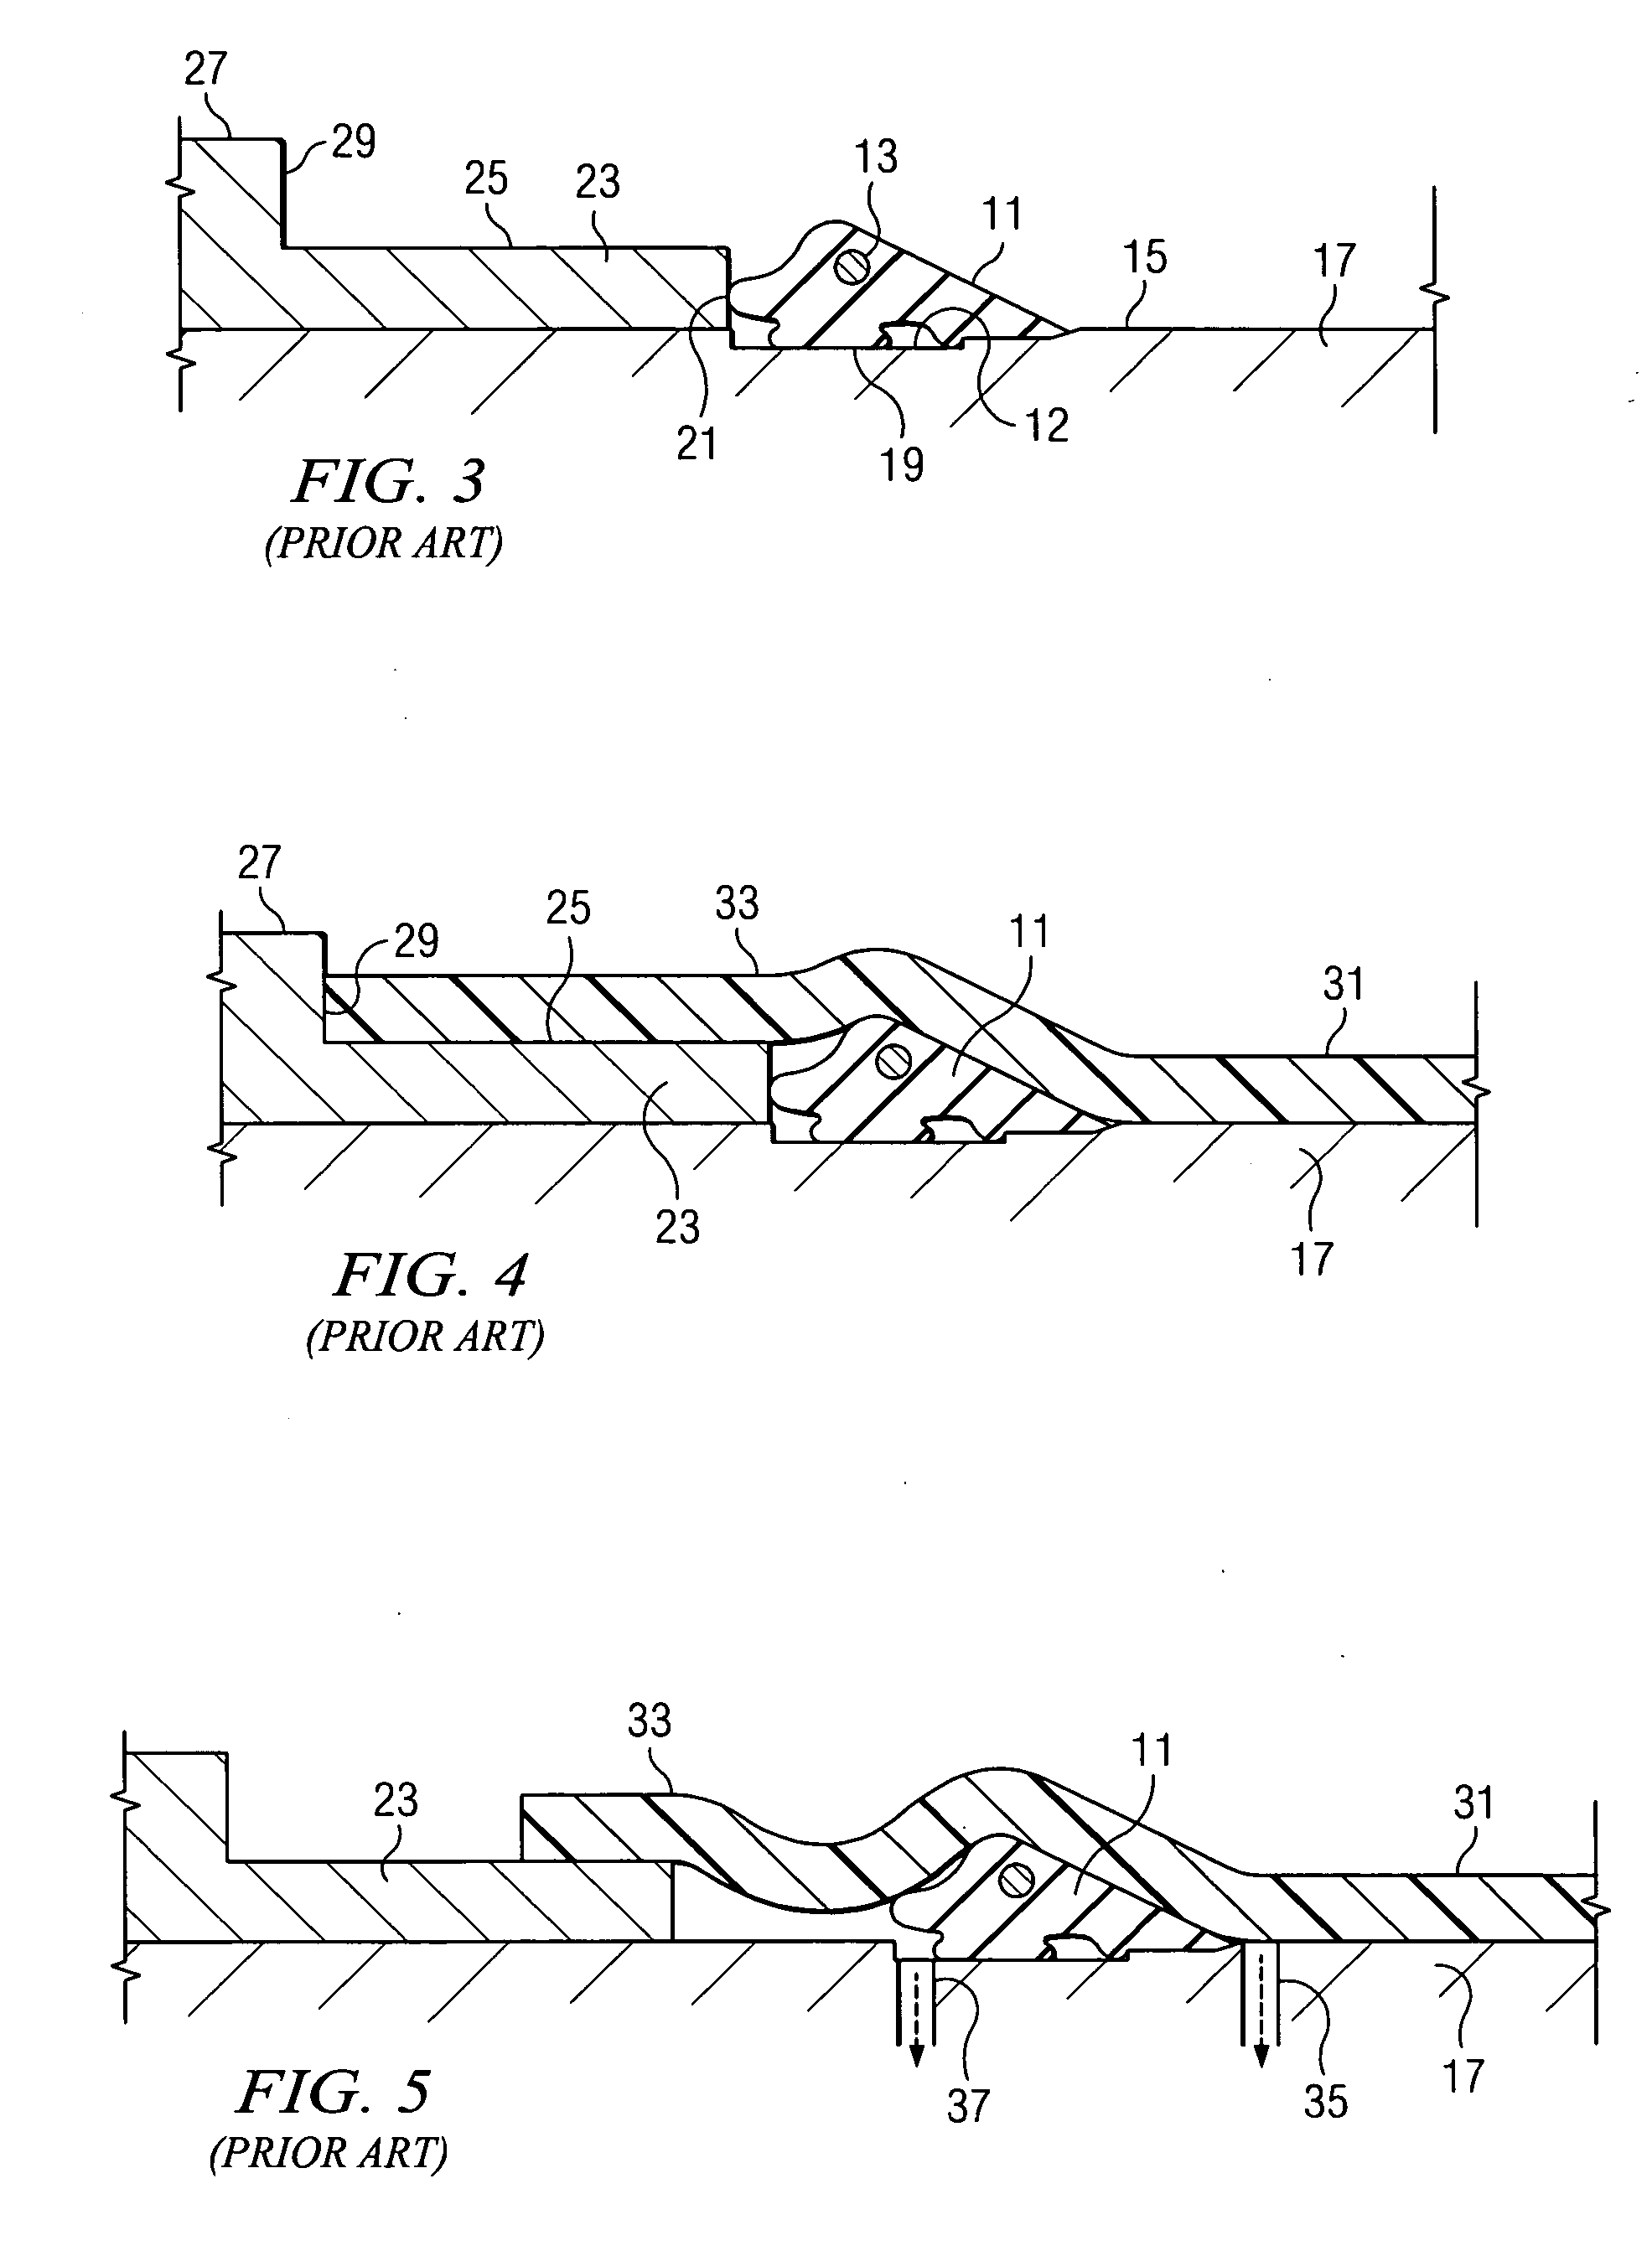 Pipe gasket with selective economy of scale